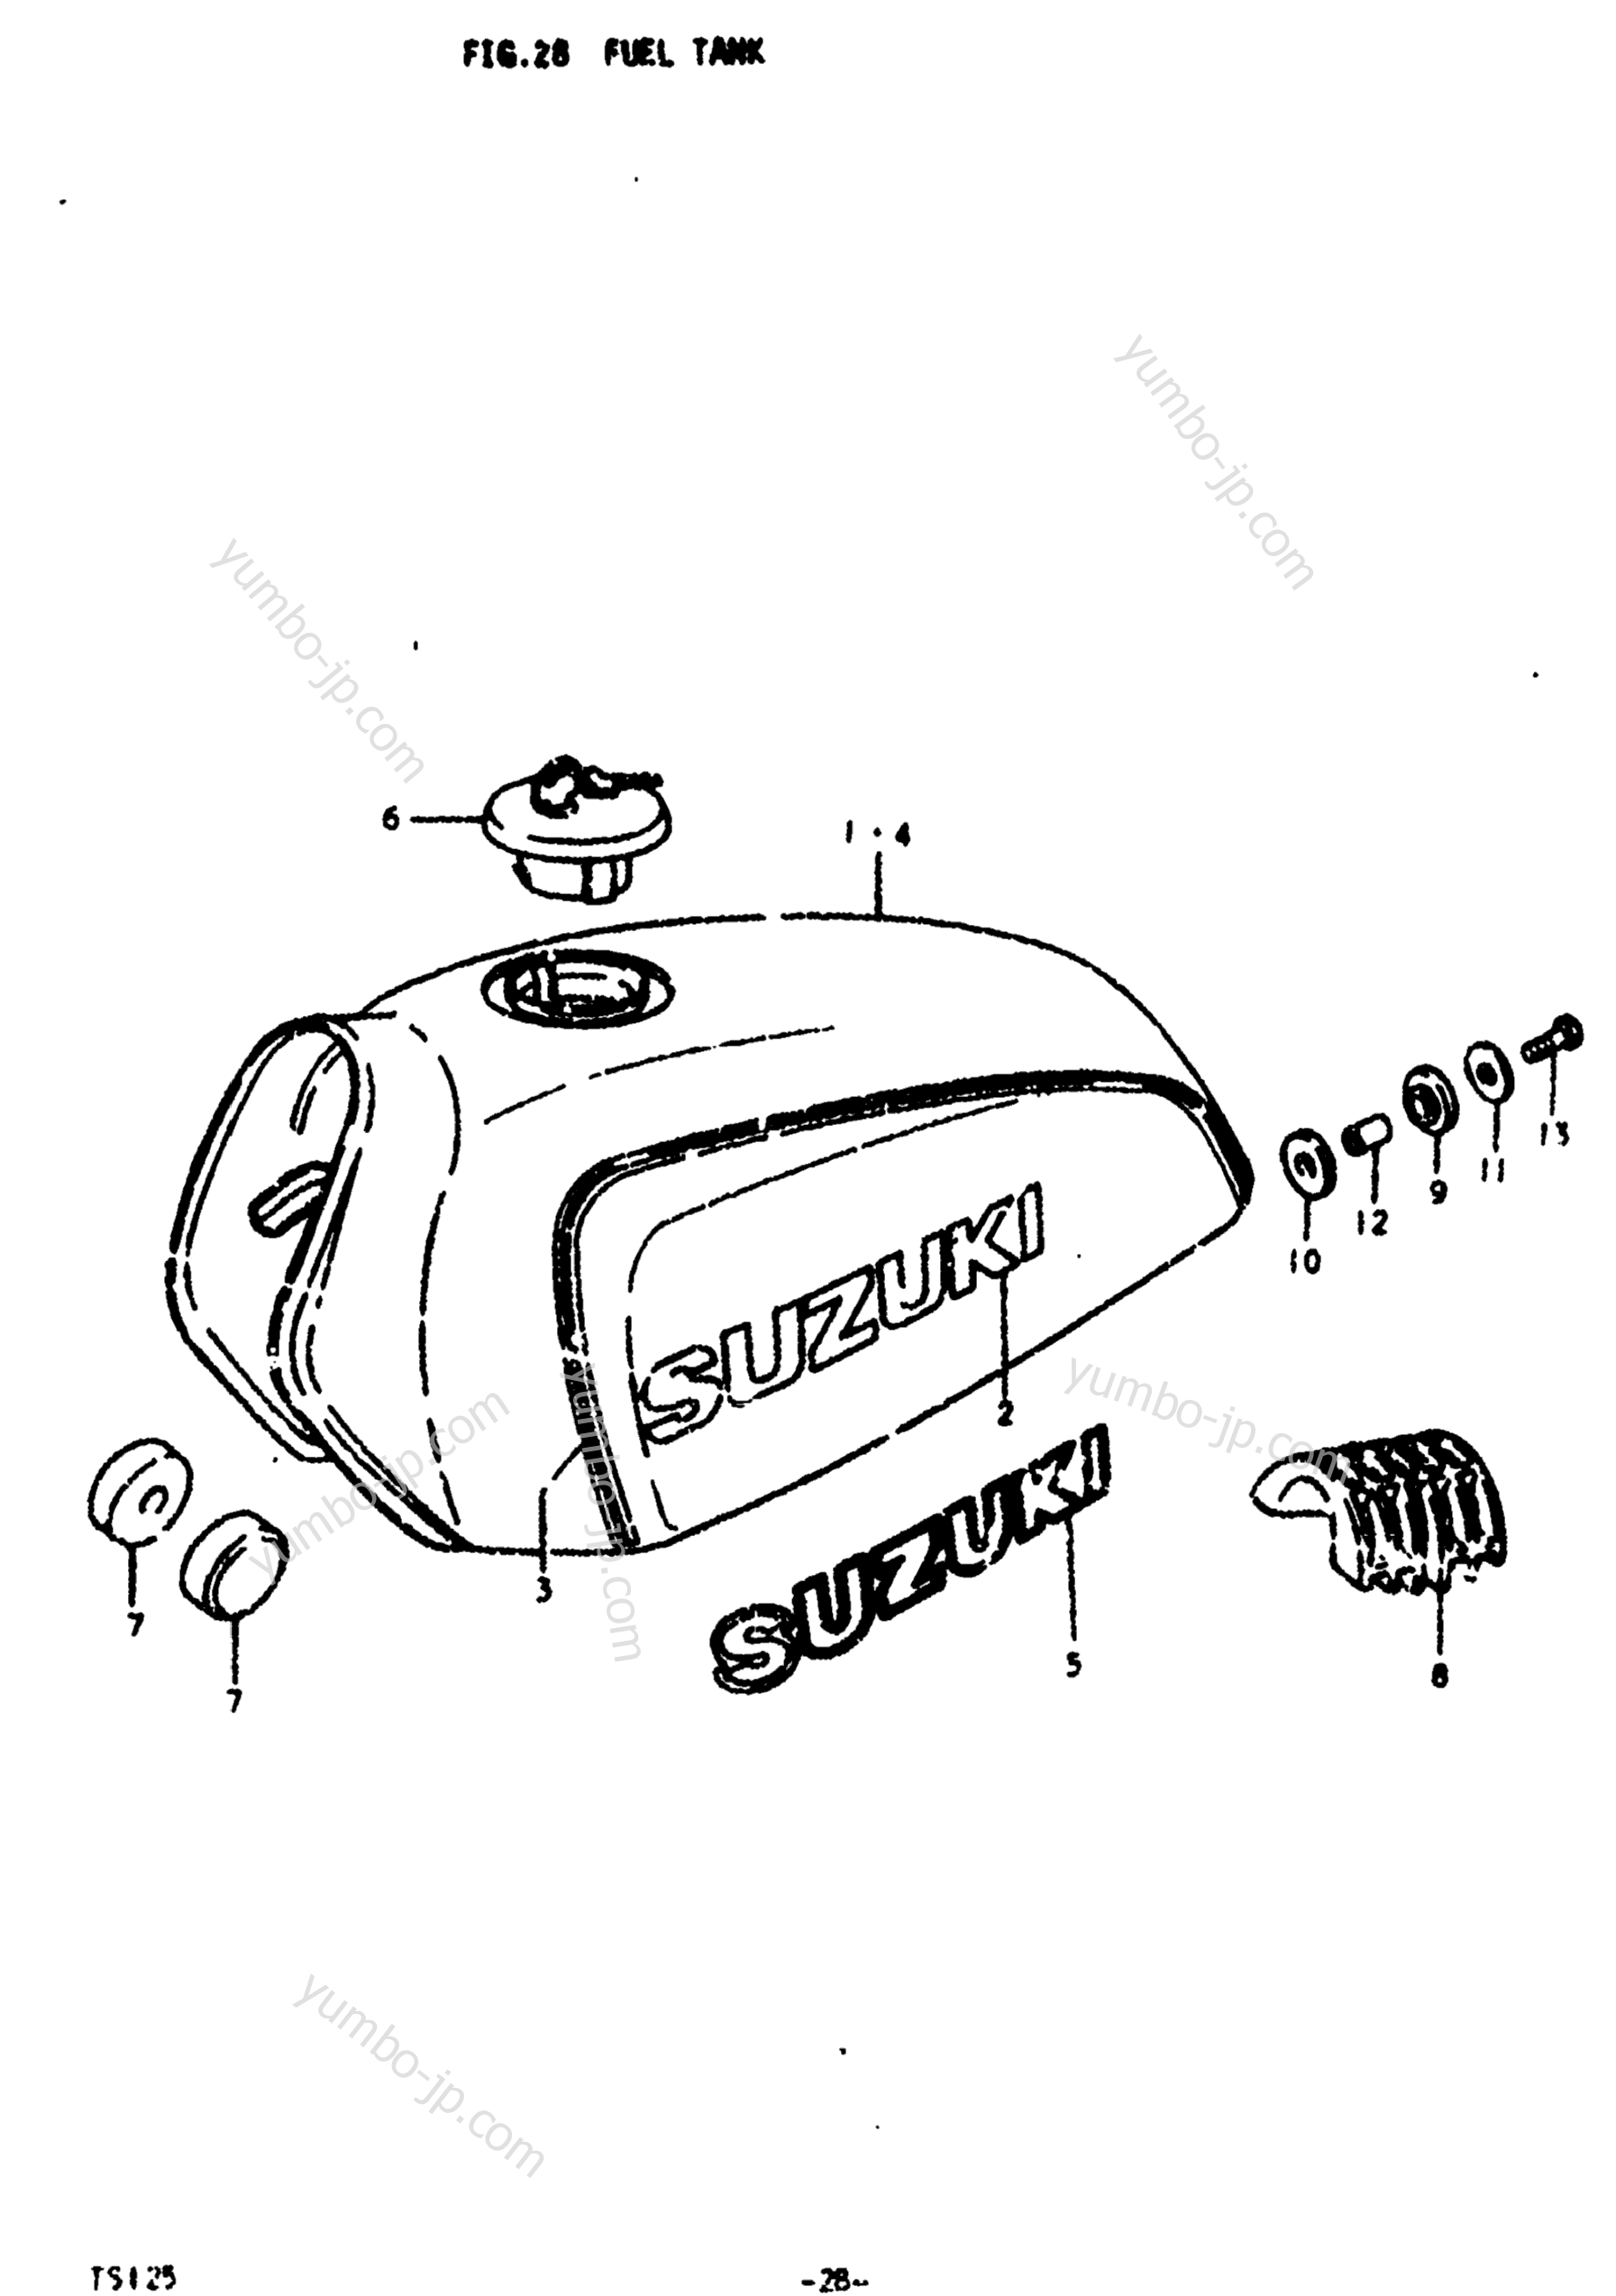 FUEL TANK for motorcycles SUZUKI TS125 1979 year